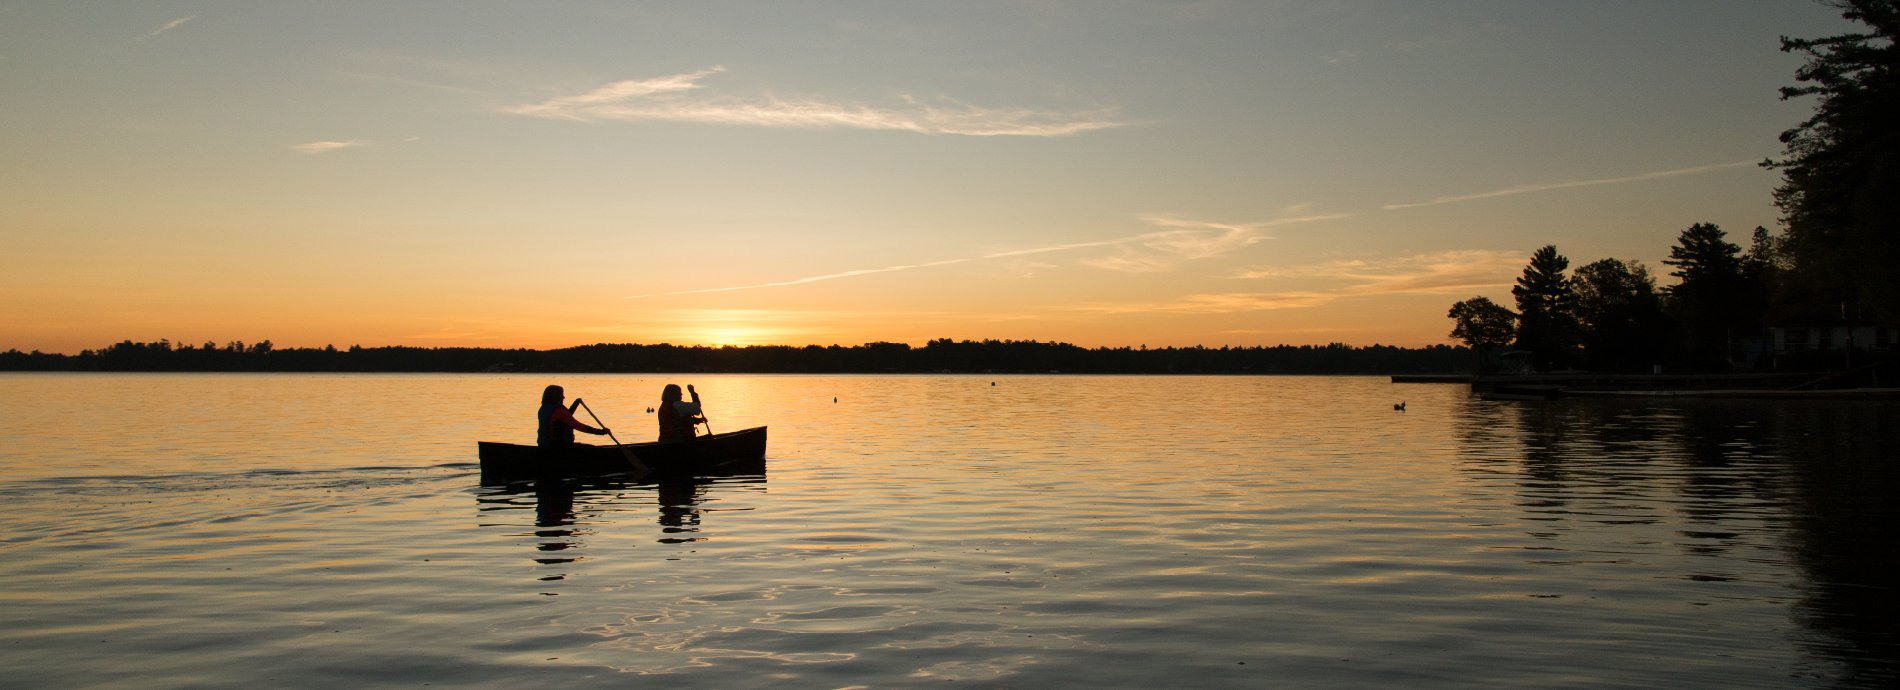 two people in a canoe at sunset